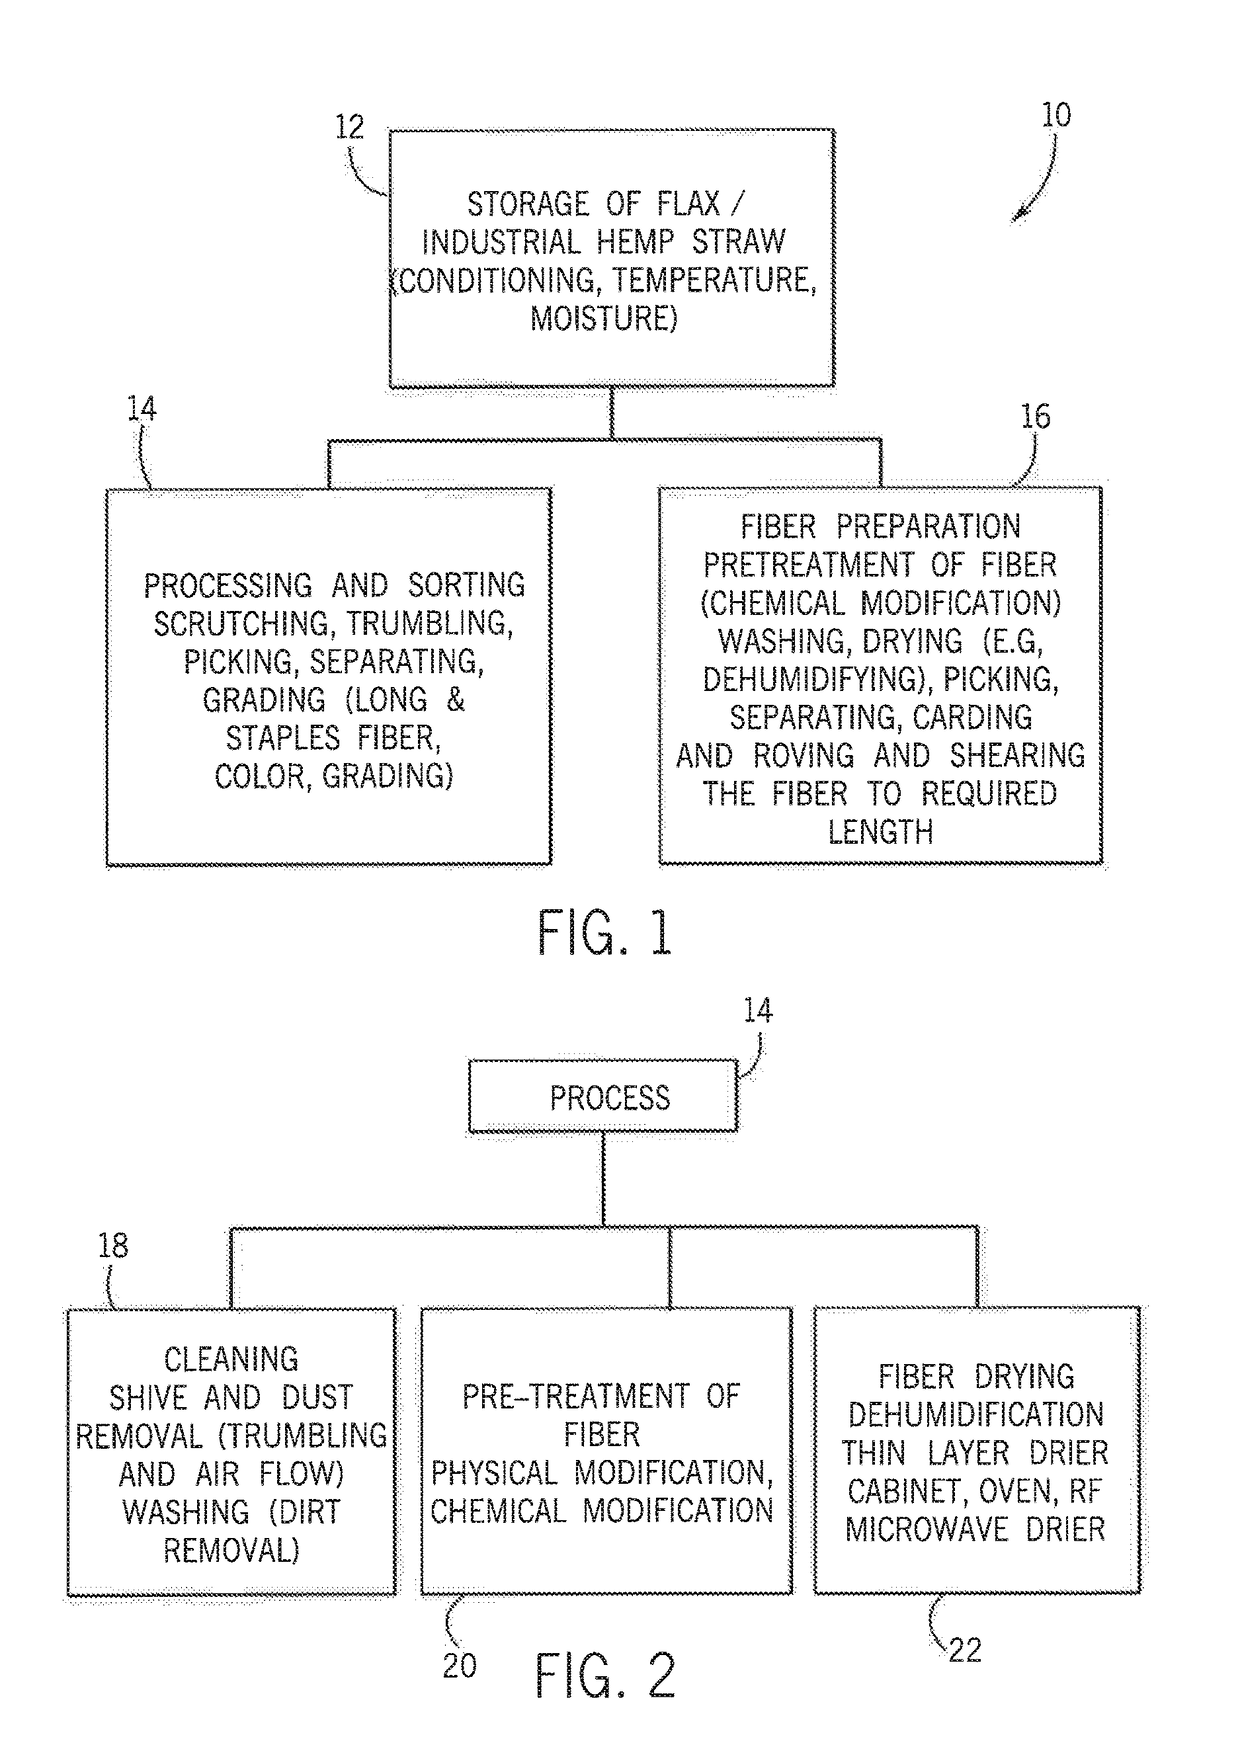 Apparatus For Processing Oilseed Flax Fiber For Use In Biocomposite Materials